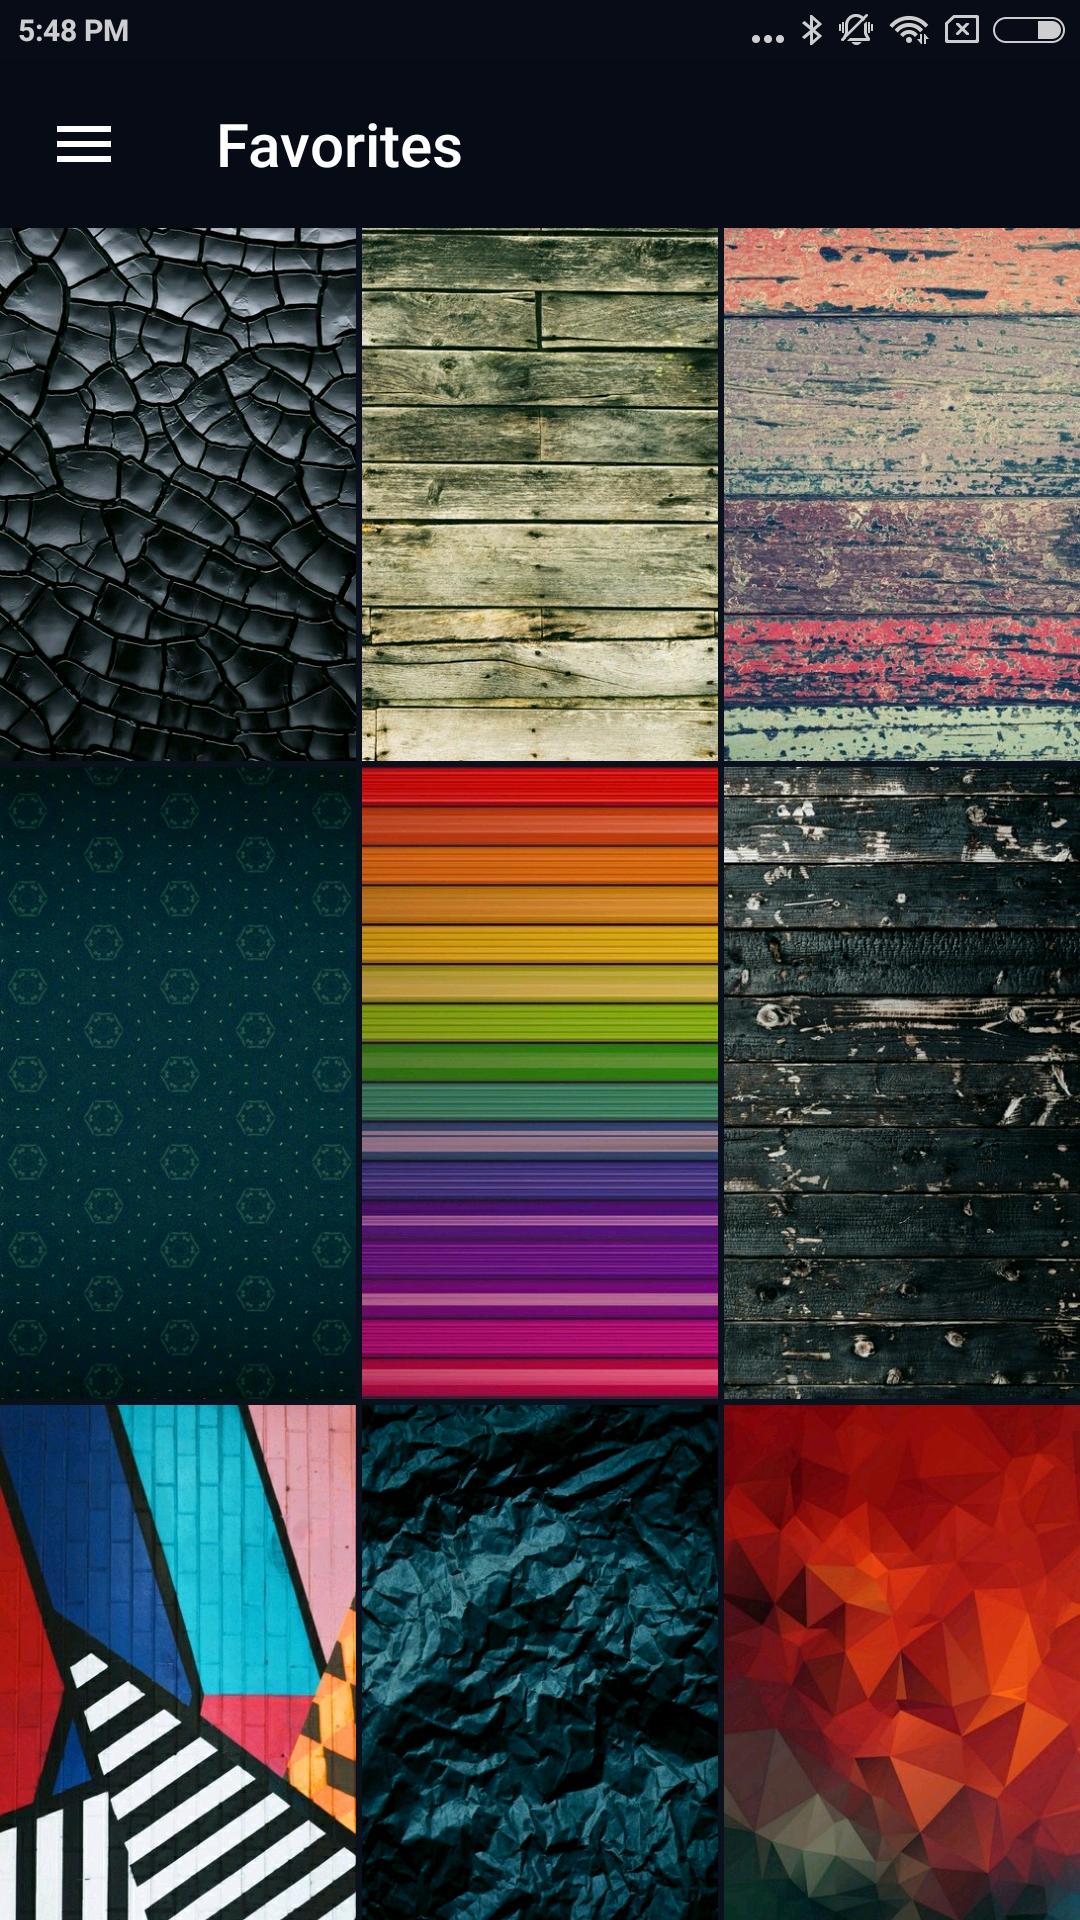 Wallpapers HD, 4K Backgrounds for Android - APK Download